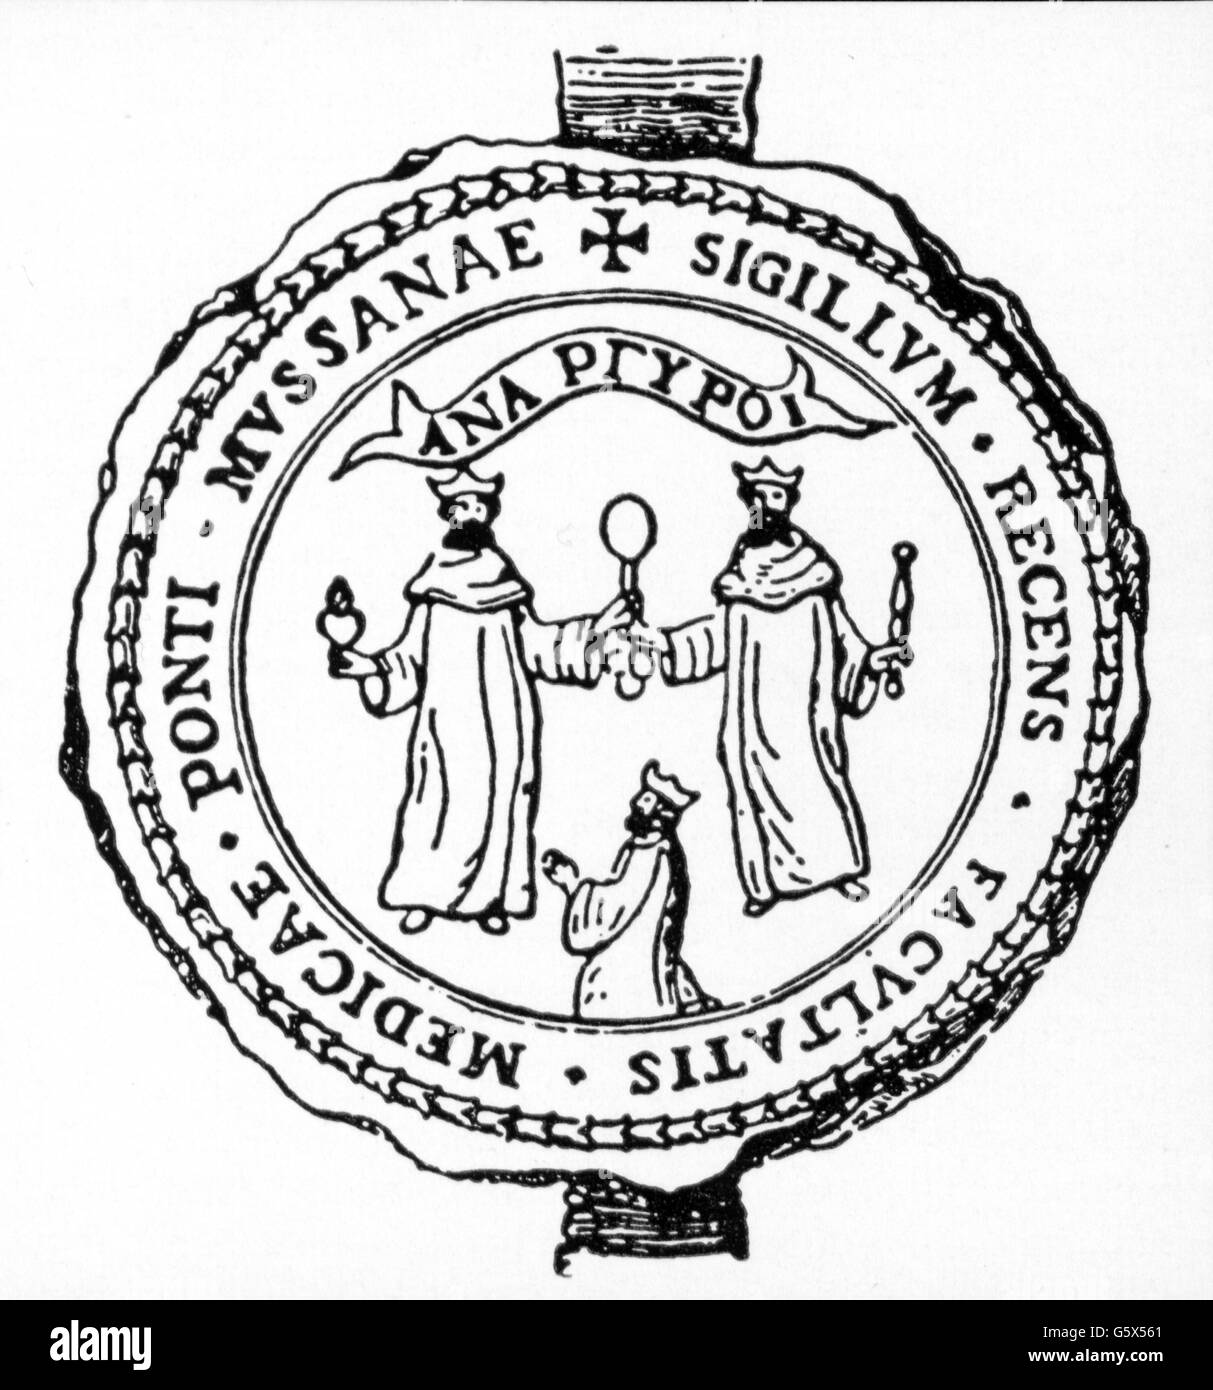 pedagogy, university, seal, medical school, Pont-a-Mousson, 16th century, drawing, 19th century, 19th century, graphic, graphics, France, symbol, symbols, Christianity, religion, religions, Catholicism, Counter-Reformation, Jesuit, Jesuits, inscription, epigraphs, inscriptions, medicine, medicines, Pont - a - Mousson, pedagogy, paedagogy, education, university, universities, faculty, department, faculties, departments, law school, historic, historical, people, Additional-Rights-Clearences-Not Available Stock Photo